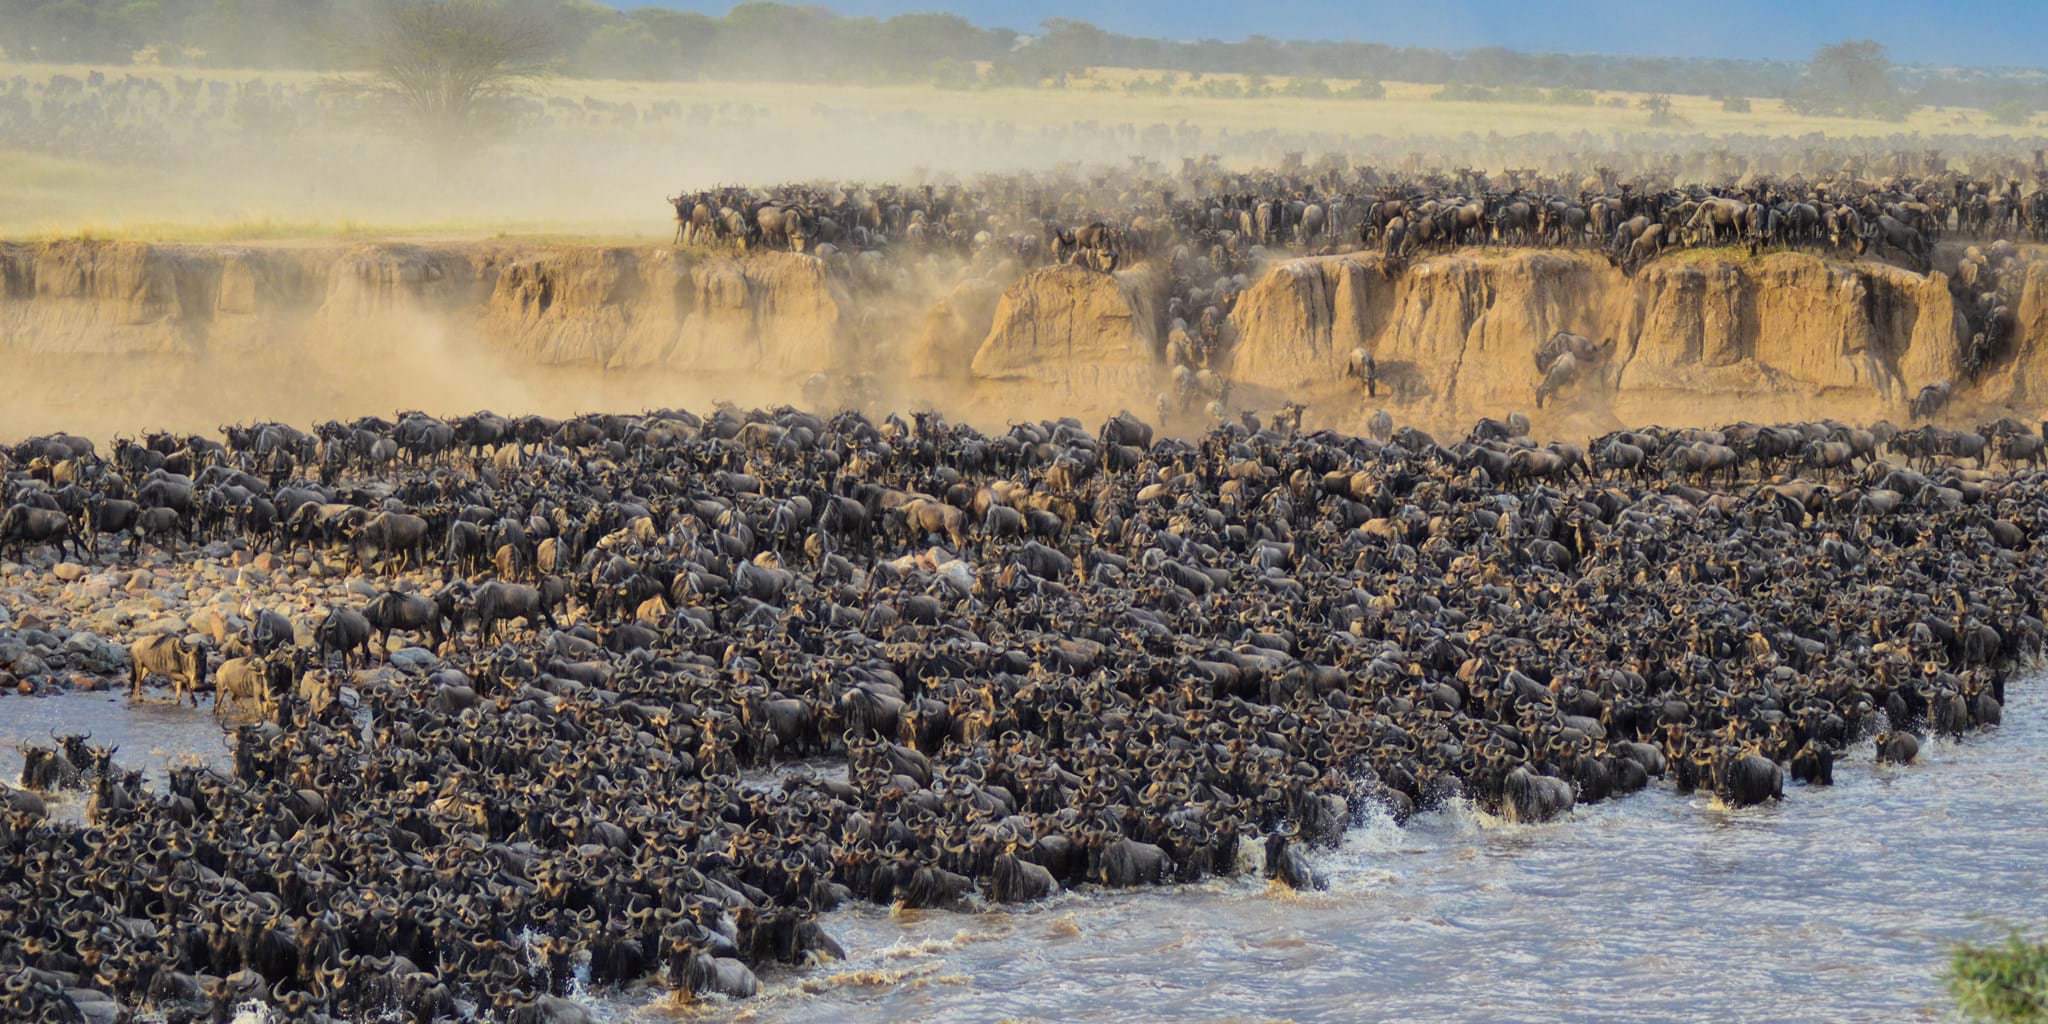 Witness the Great Migration